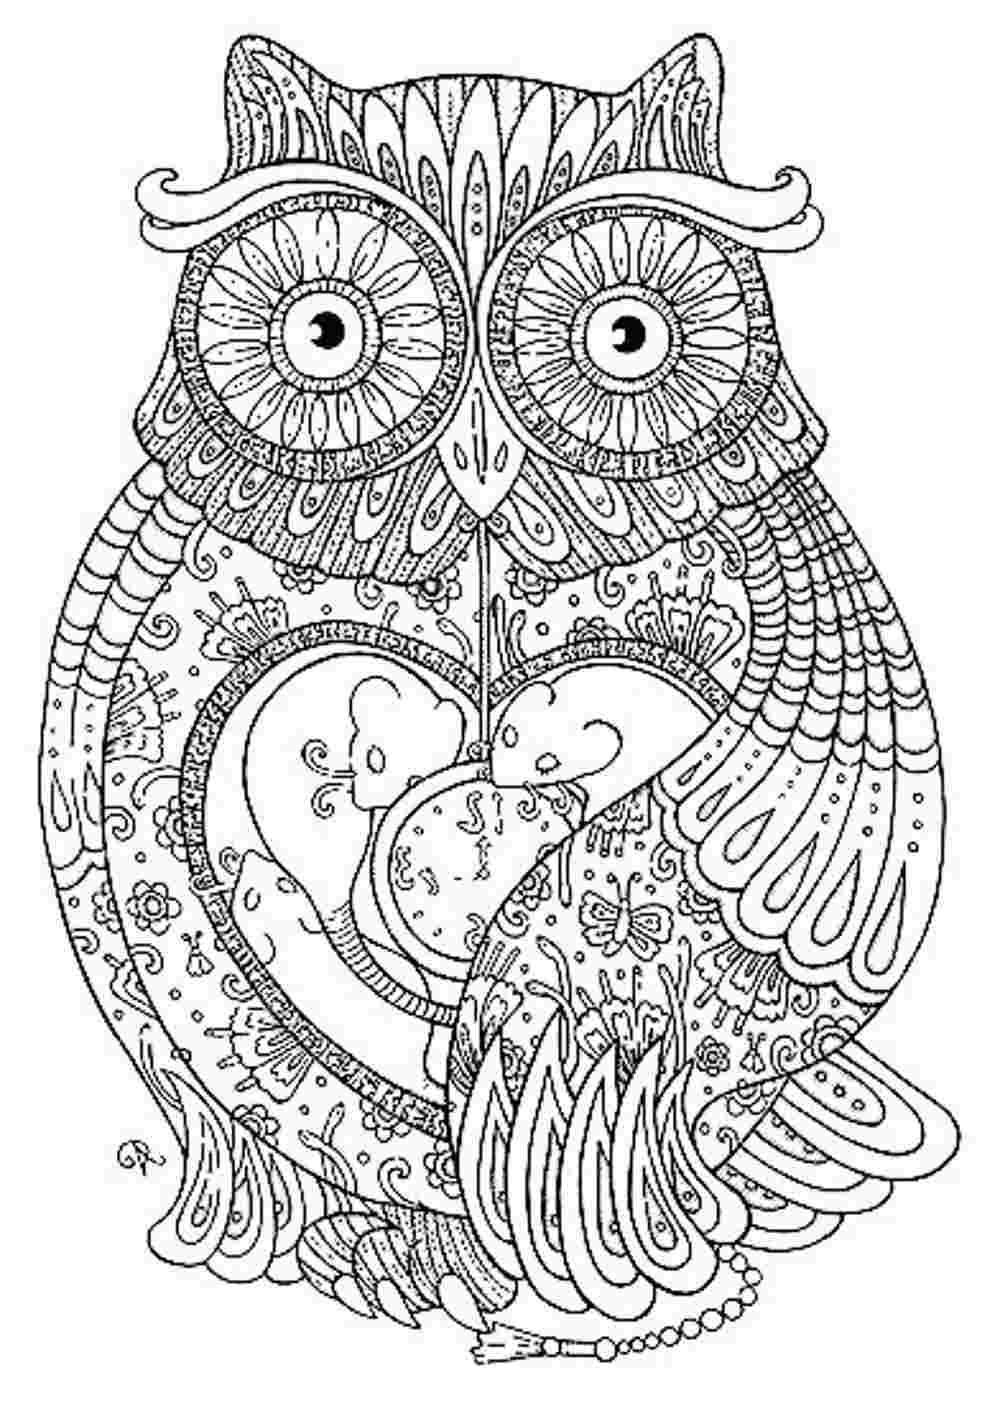 Free Downloadable Coloring Pages For Adults
 44 Awesome Free Printable Coloring Pages for Adults